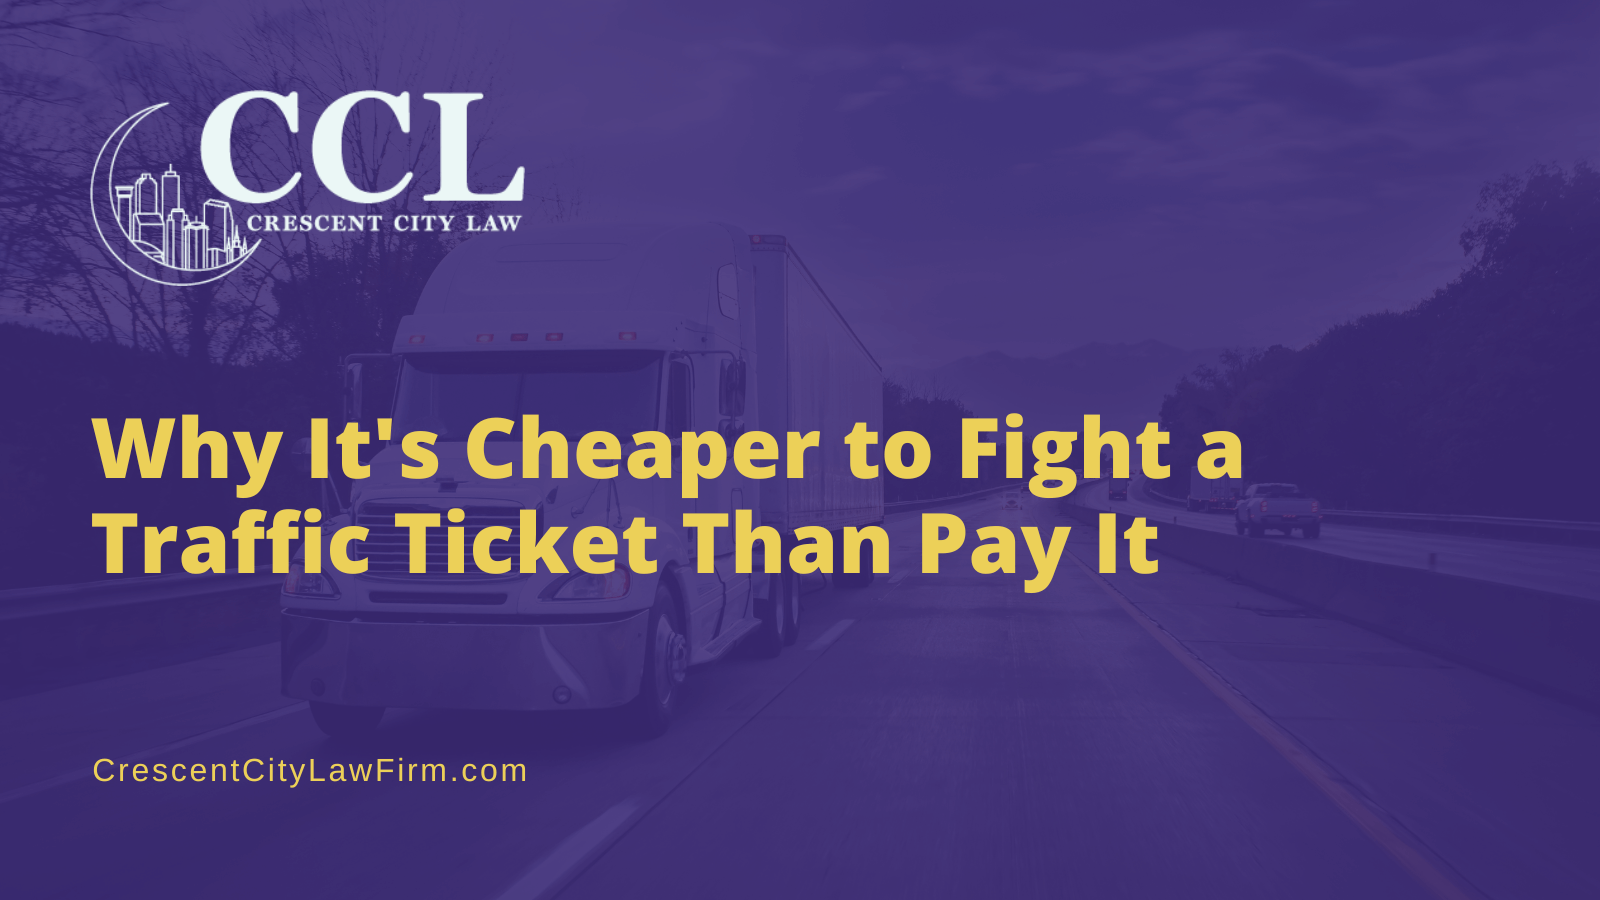 Why It's Cheaper to Fight a Traffic Ticket Than Pay It - crescent city law firm - new orleans la